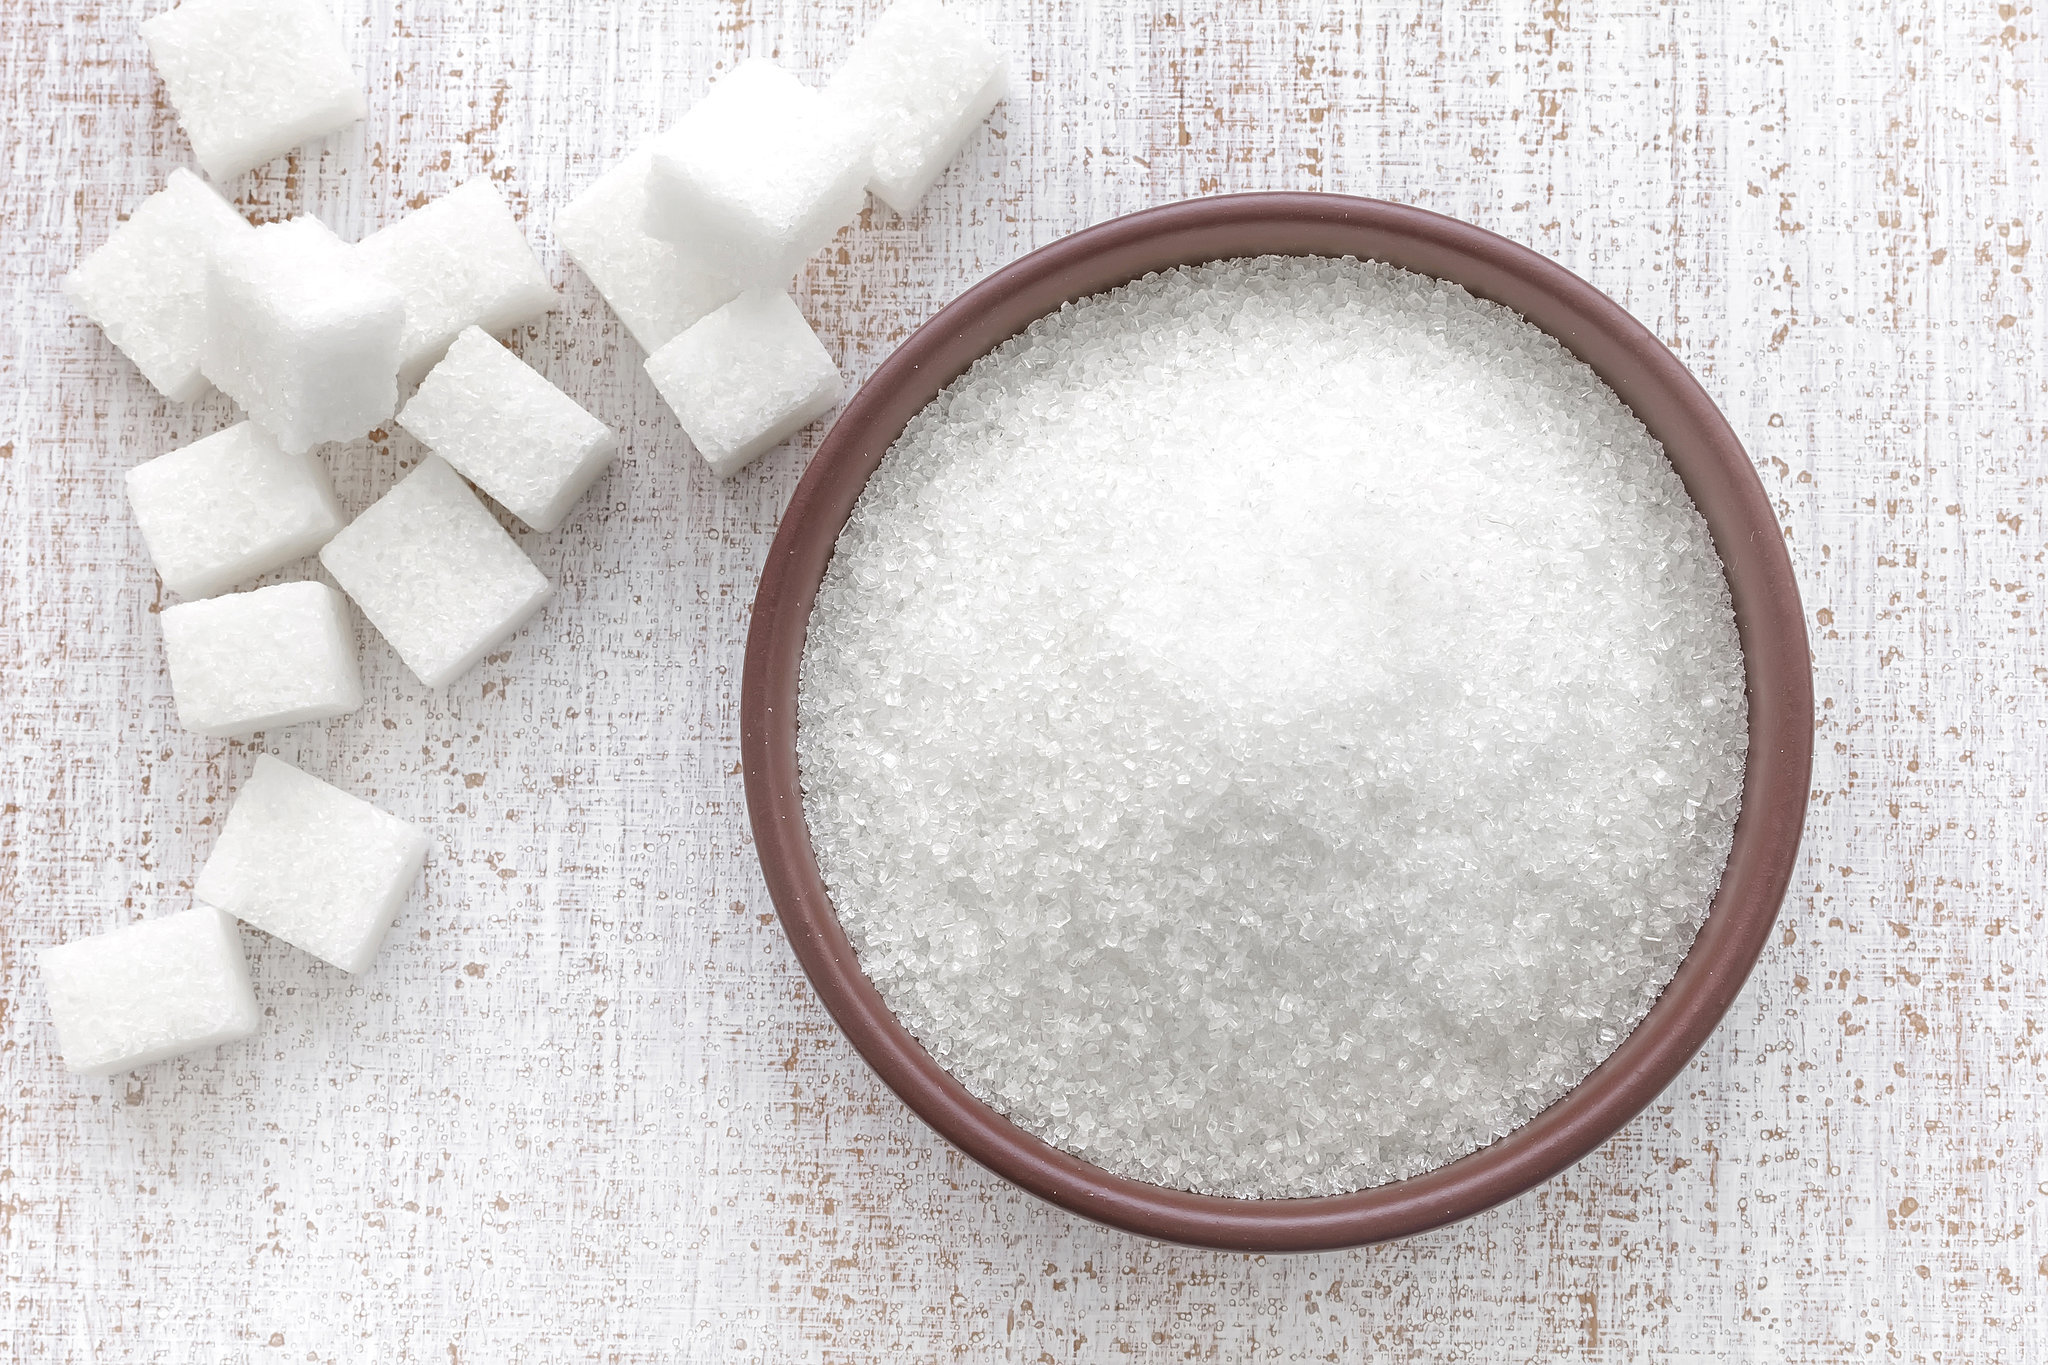 Things You Need to Know about Sugar